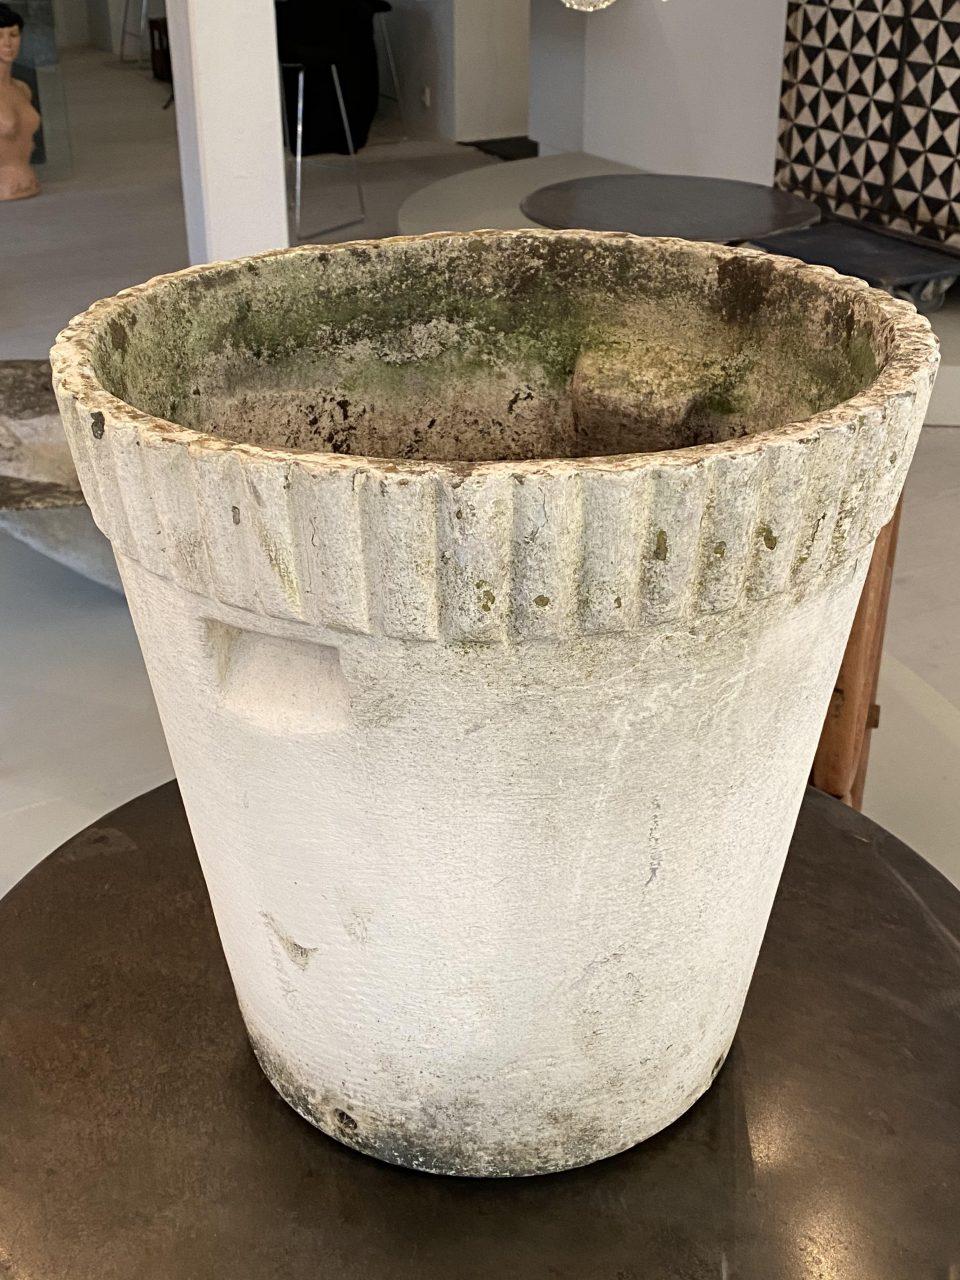 Beautiful vintage garden planter / jardinière designed by Swiss Willy Guhl. The design is a beautiful cylindrical shape, with a grooved brim and indentations as handles. Fantastic authentic patina from the wind and weather. Produced in fibre cement